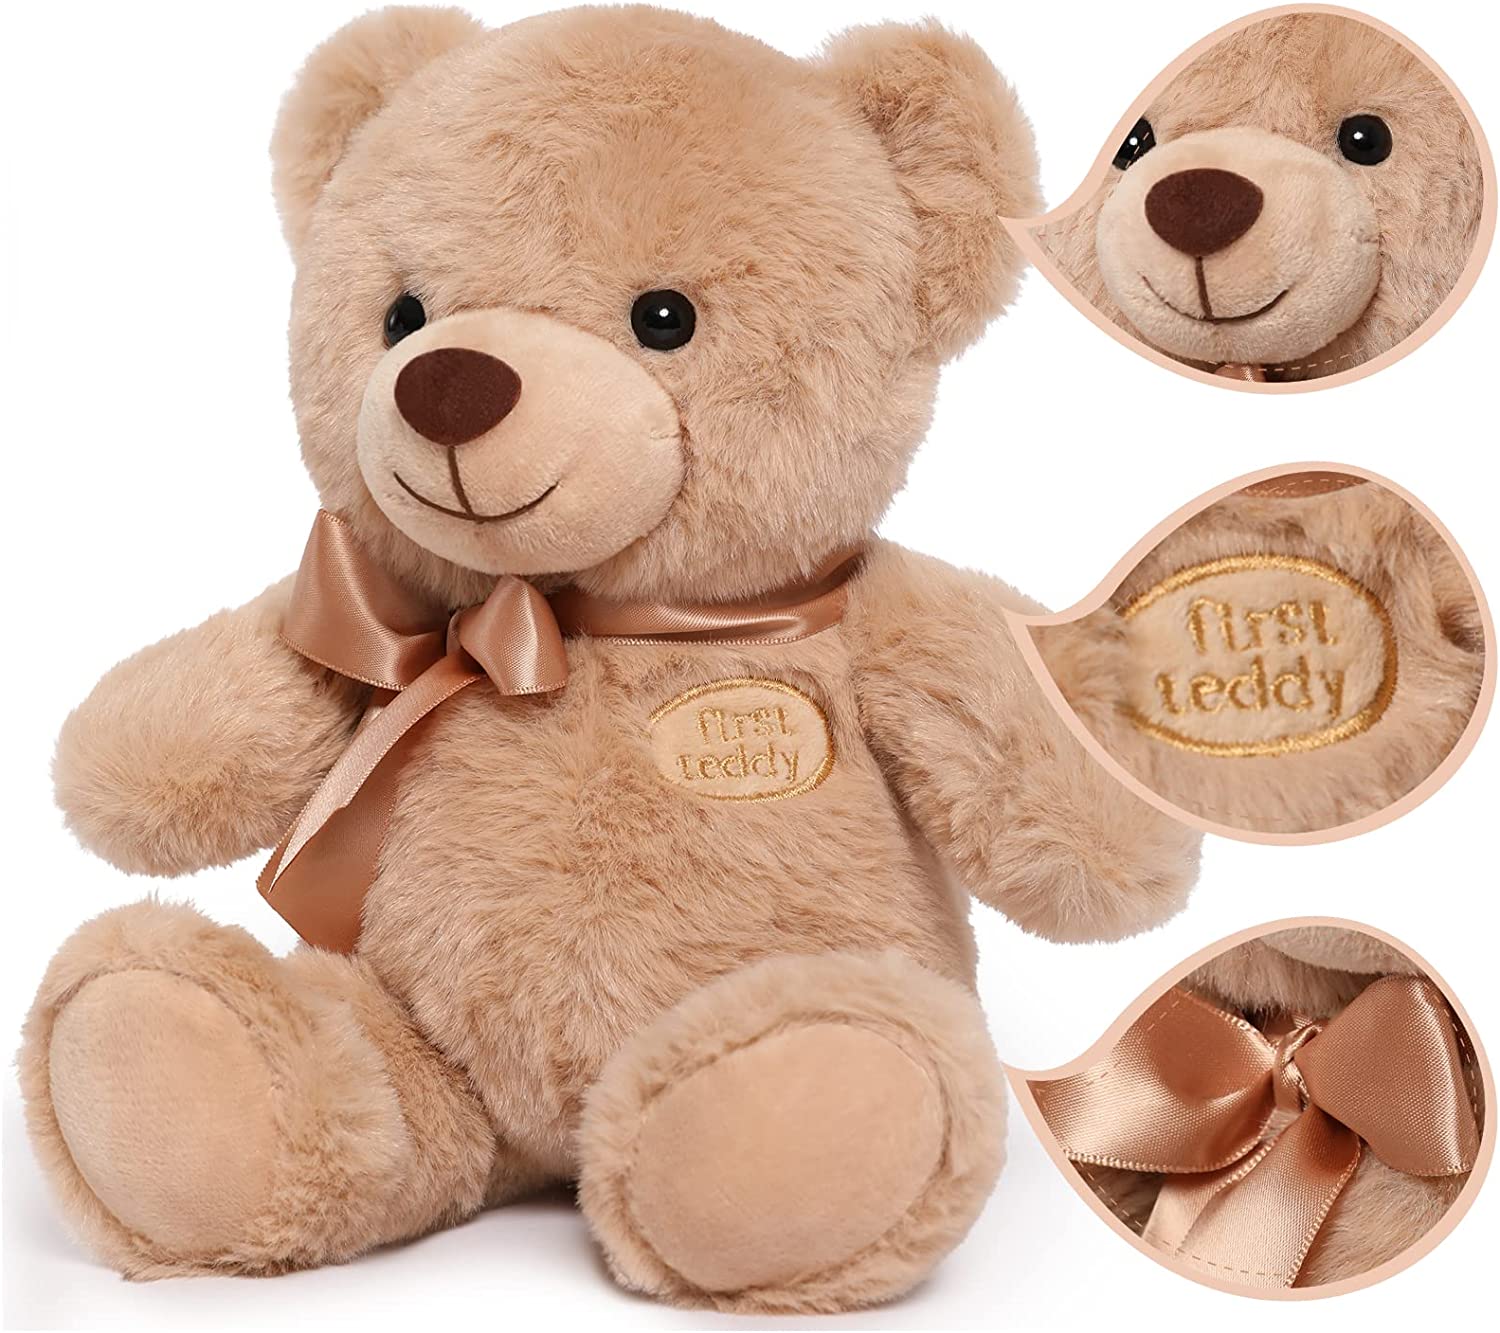 2-Pack Teddy Bear Plush Toy Set, 11.8 Inches